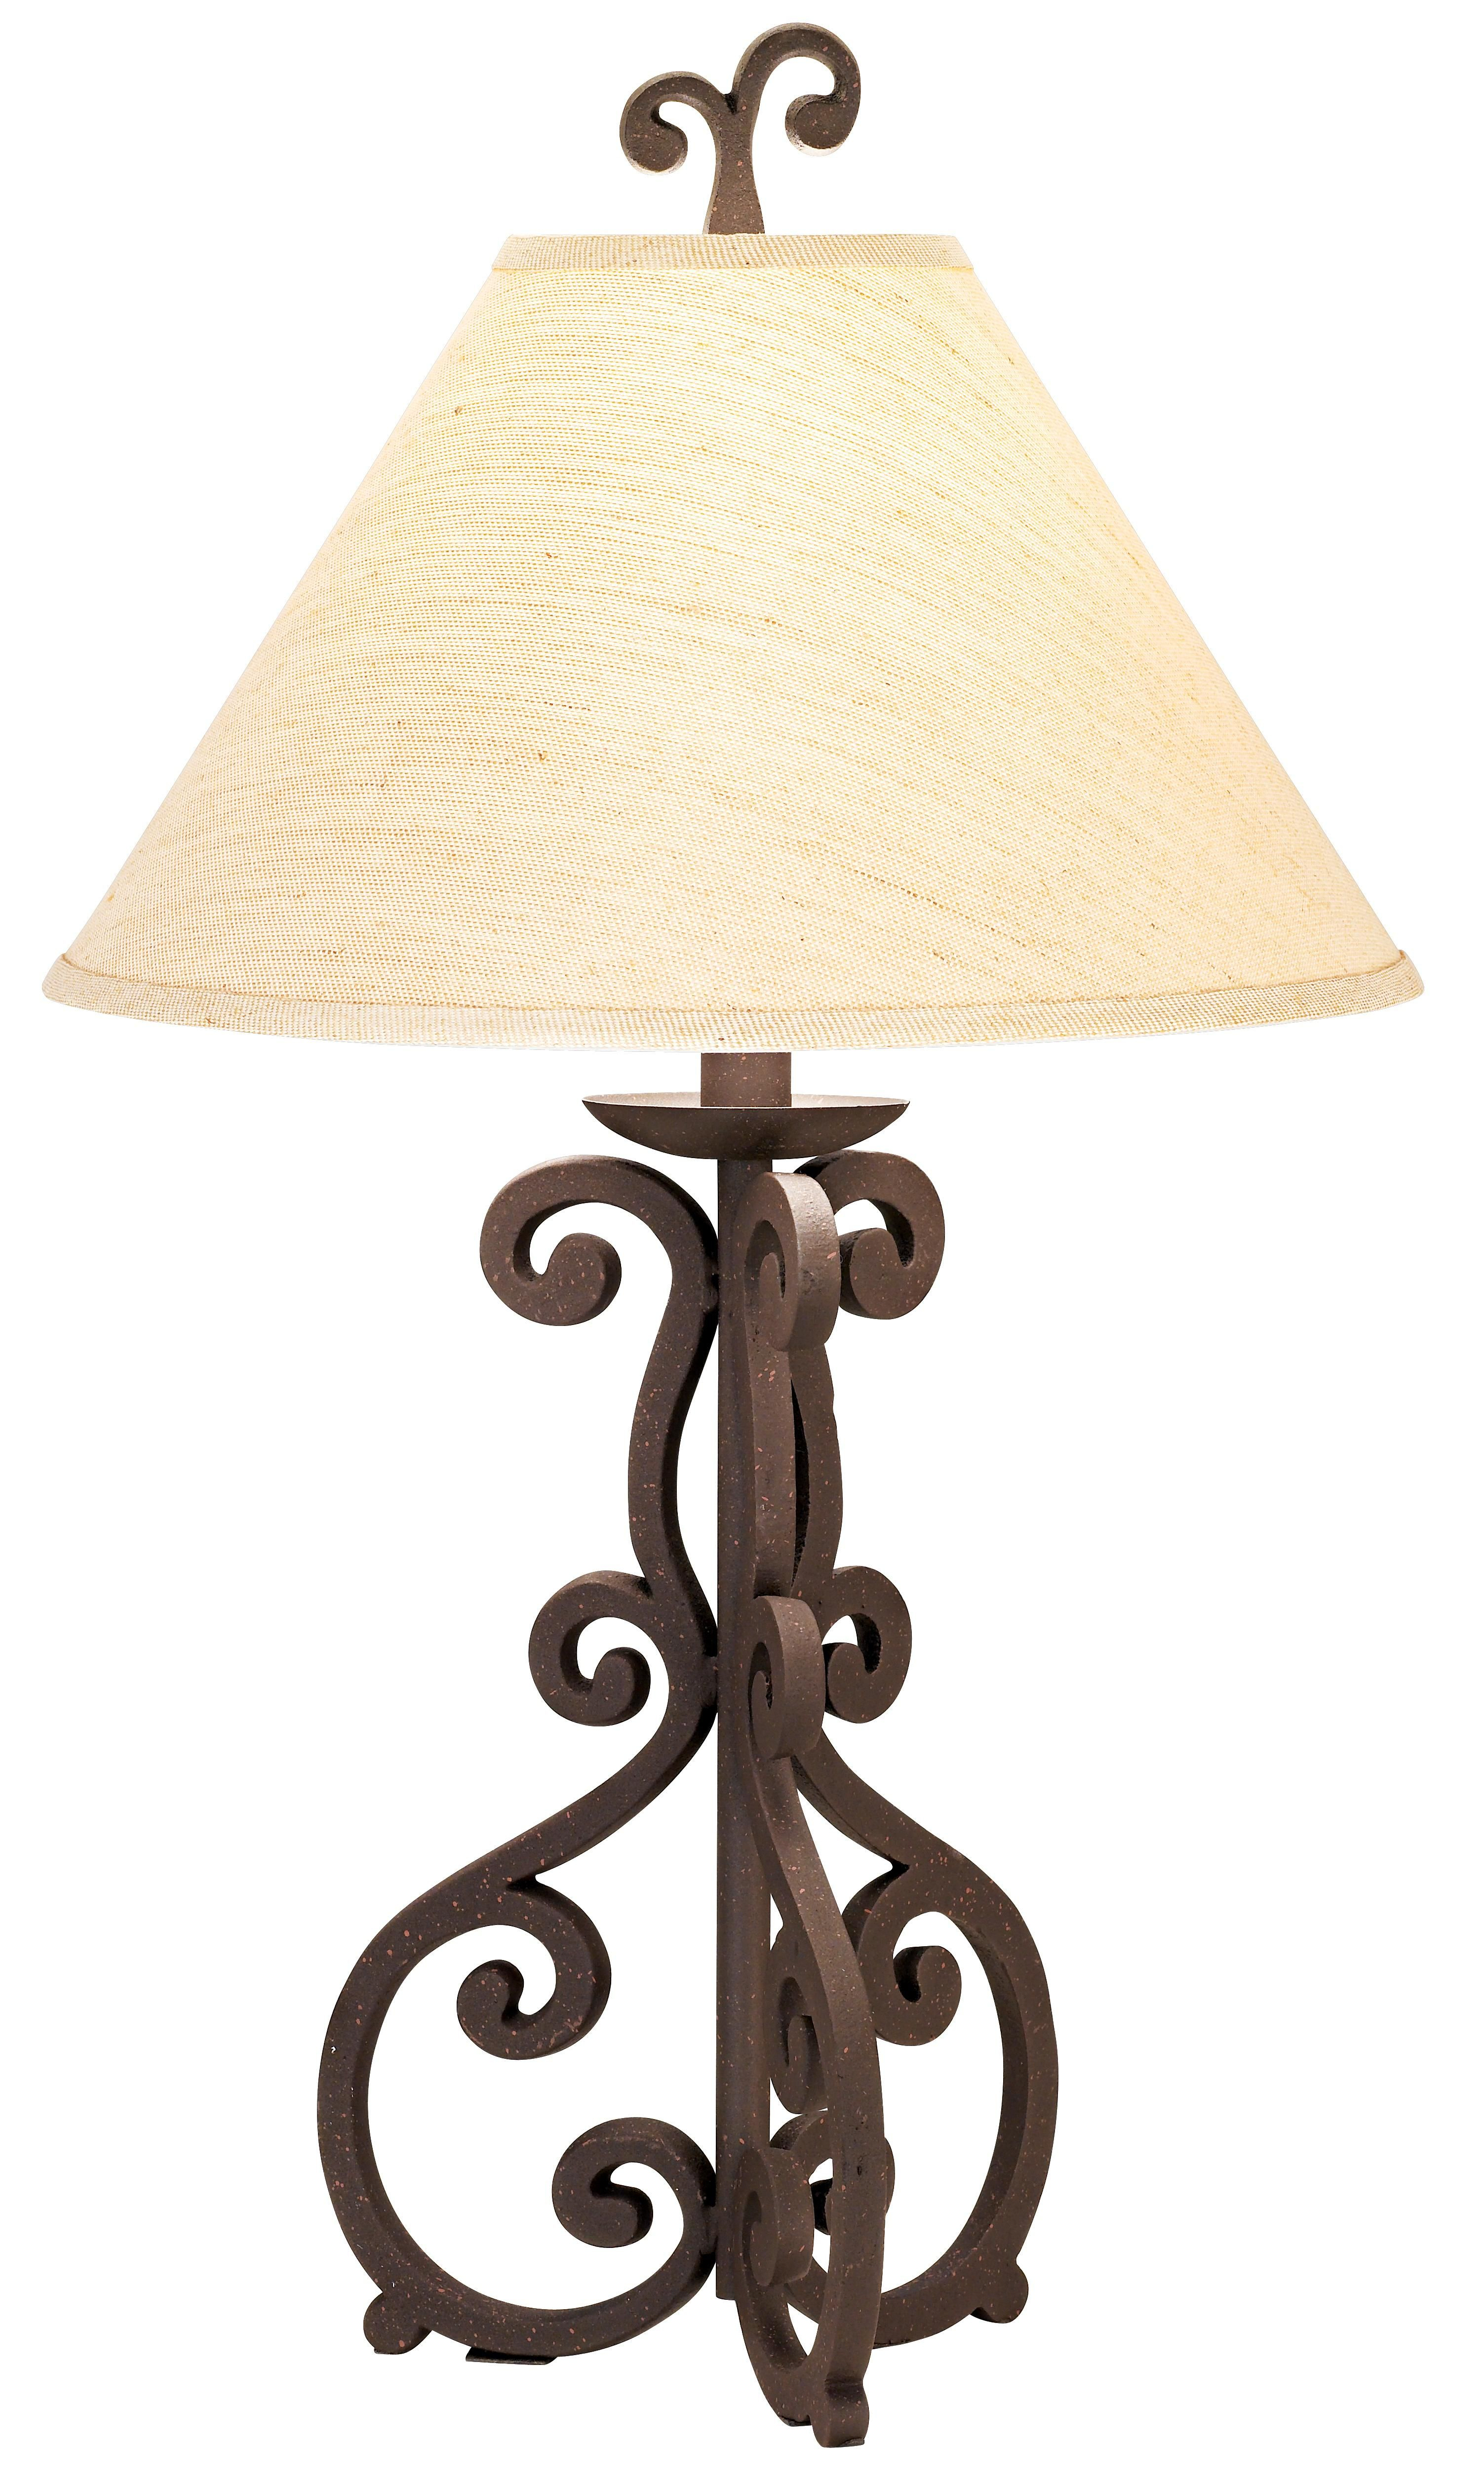 High Iron Scroll Table Lamp In 2019 Table Lamp Bedroom with regard to dimensions 3006 X 5032